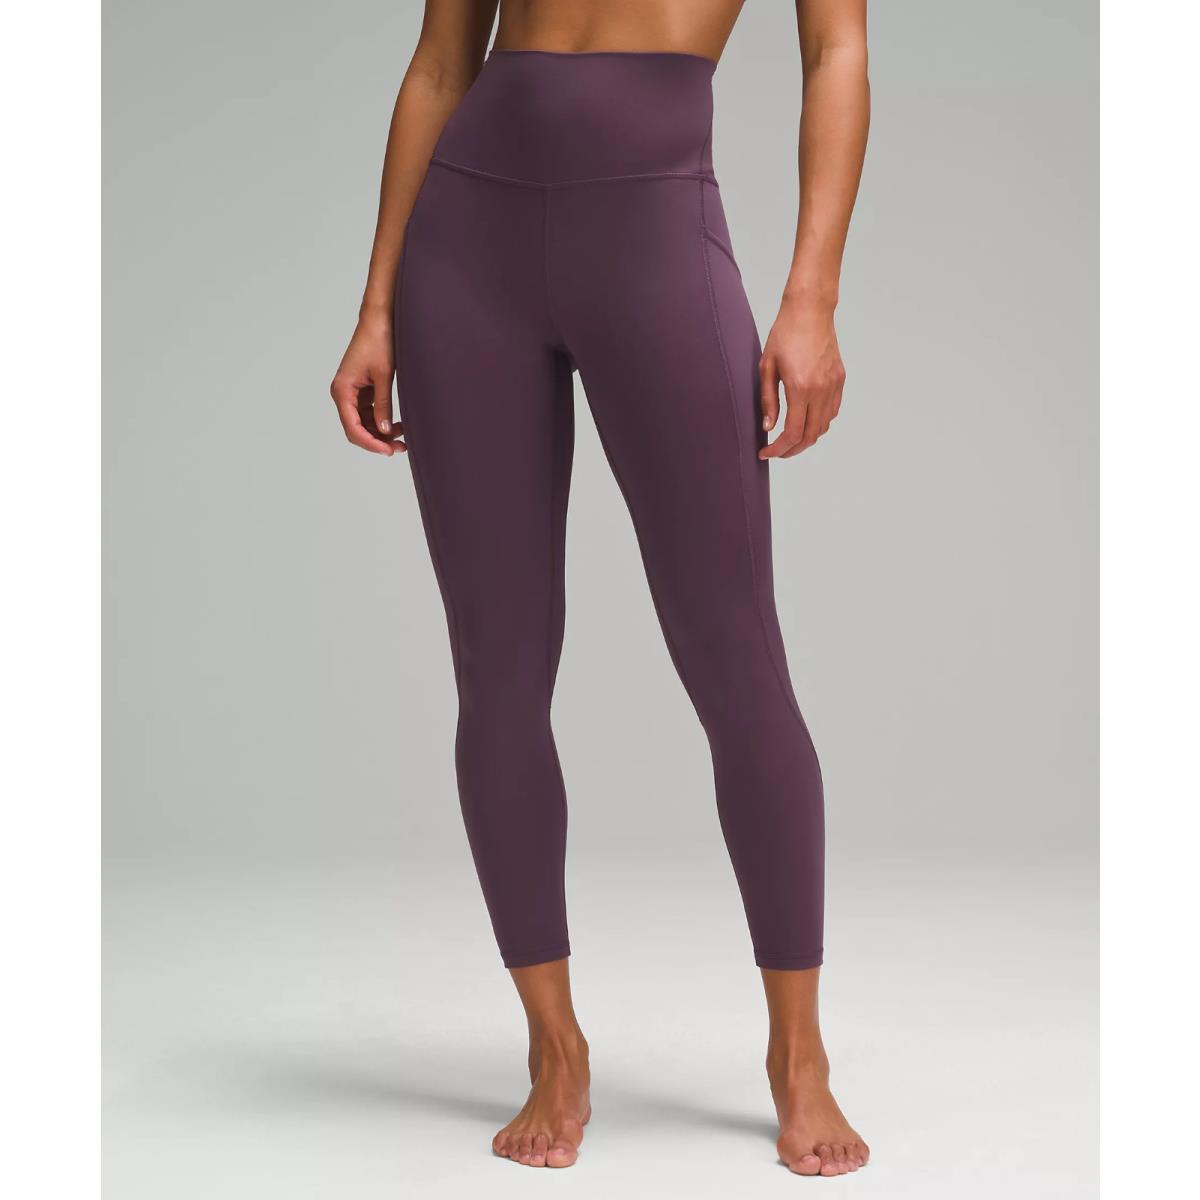 Lululemon Align High Rise Pant with Pockets 25 Grape Thistle Tight Size 10